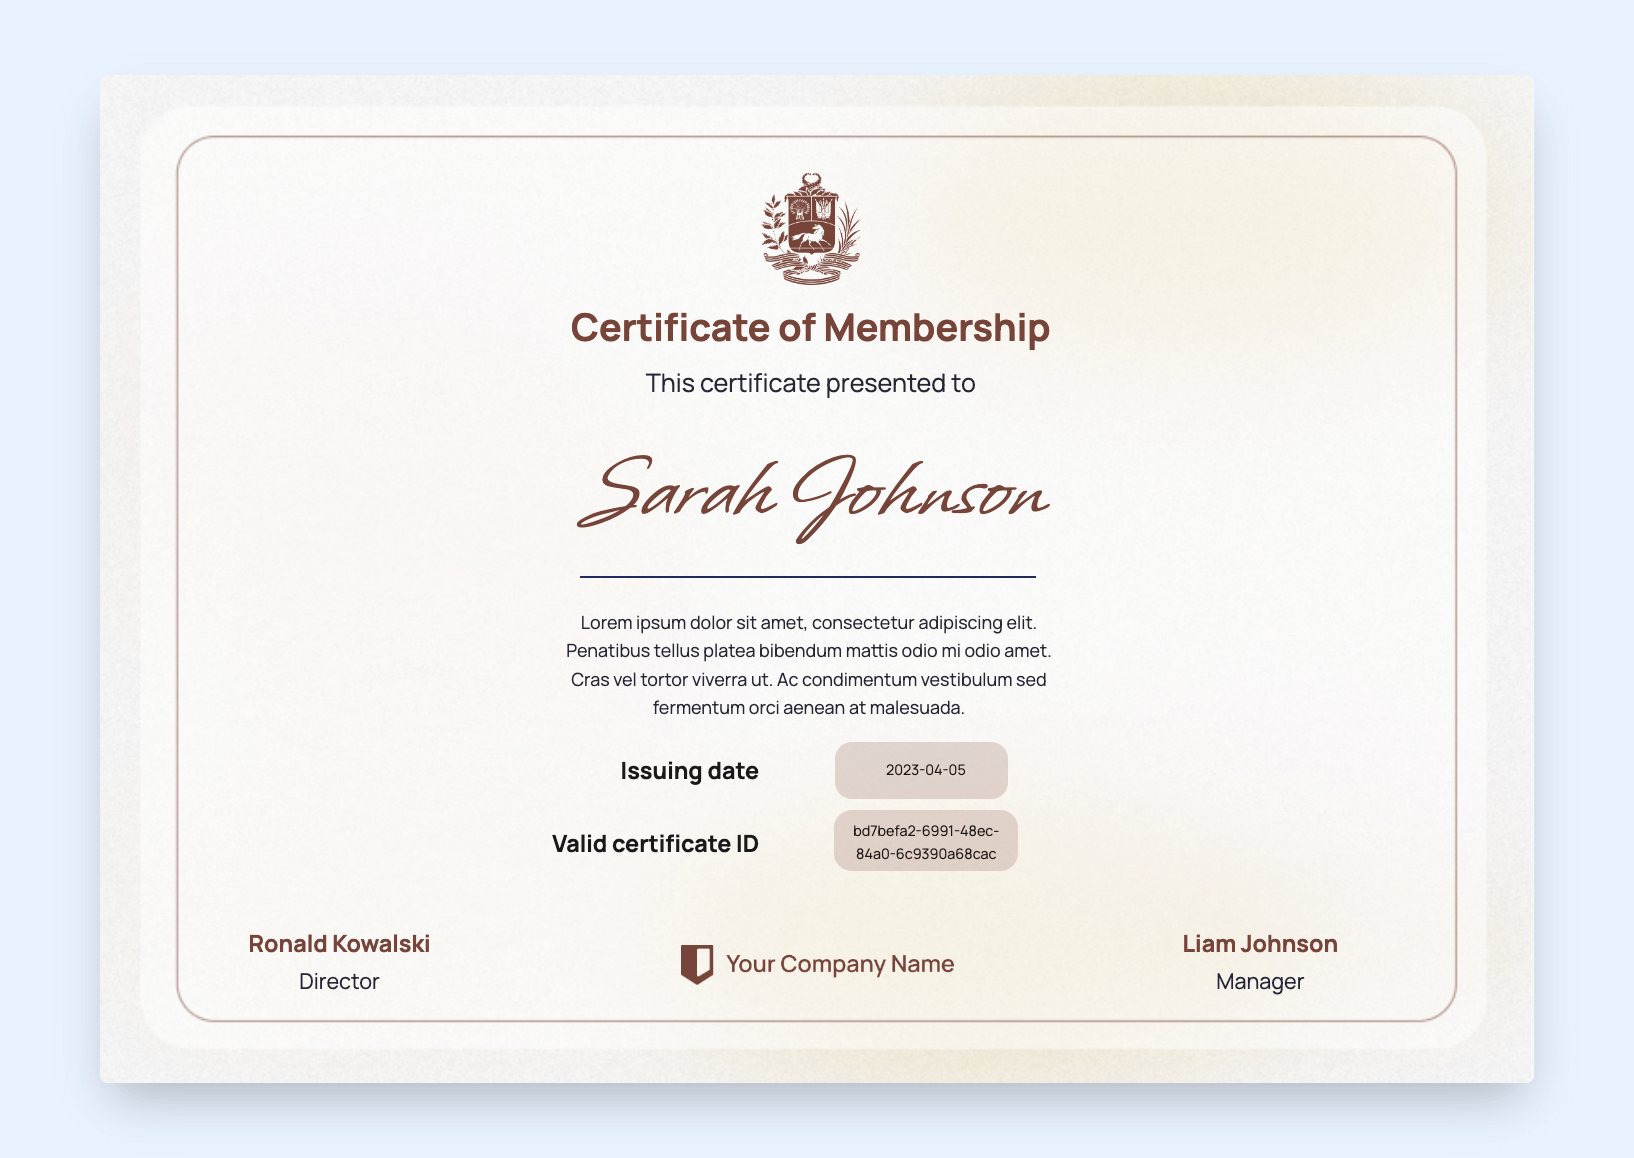 Certificate of membership that is simple and minimalistic.